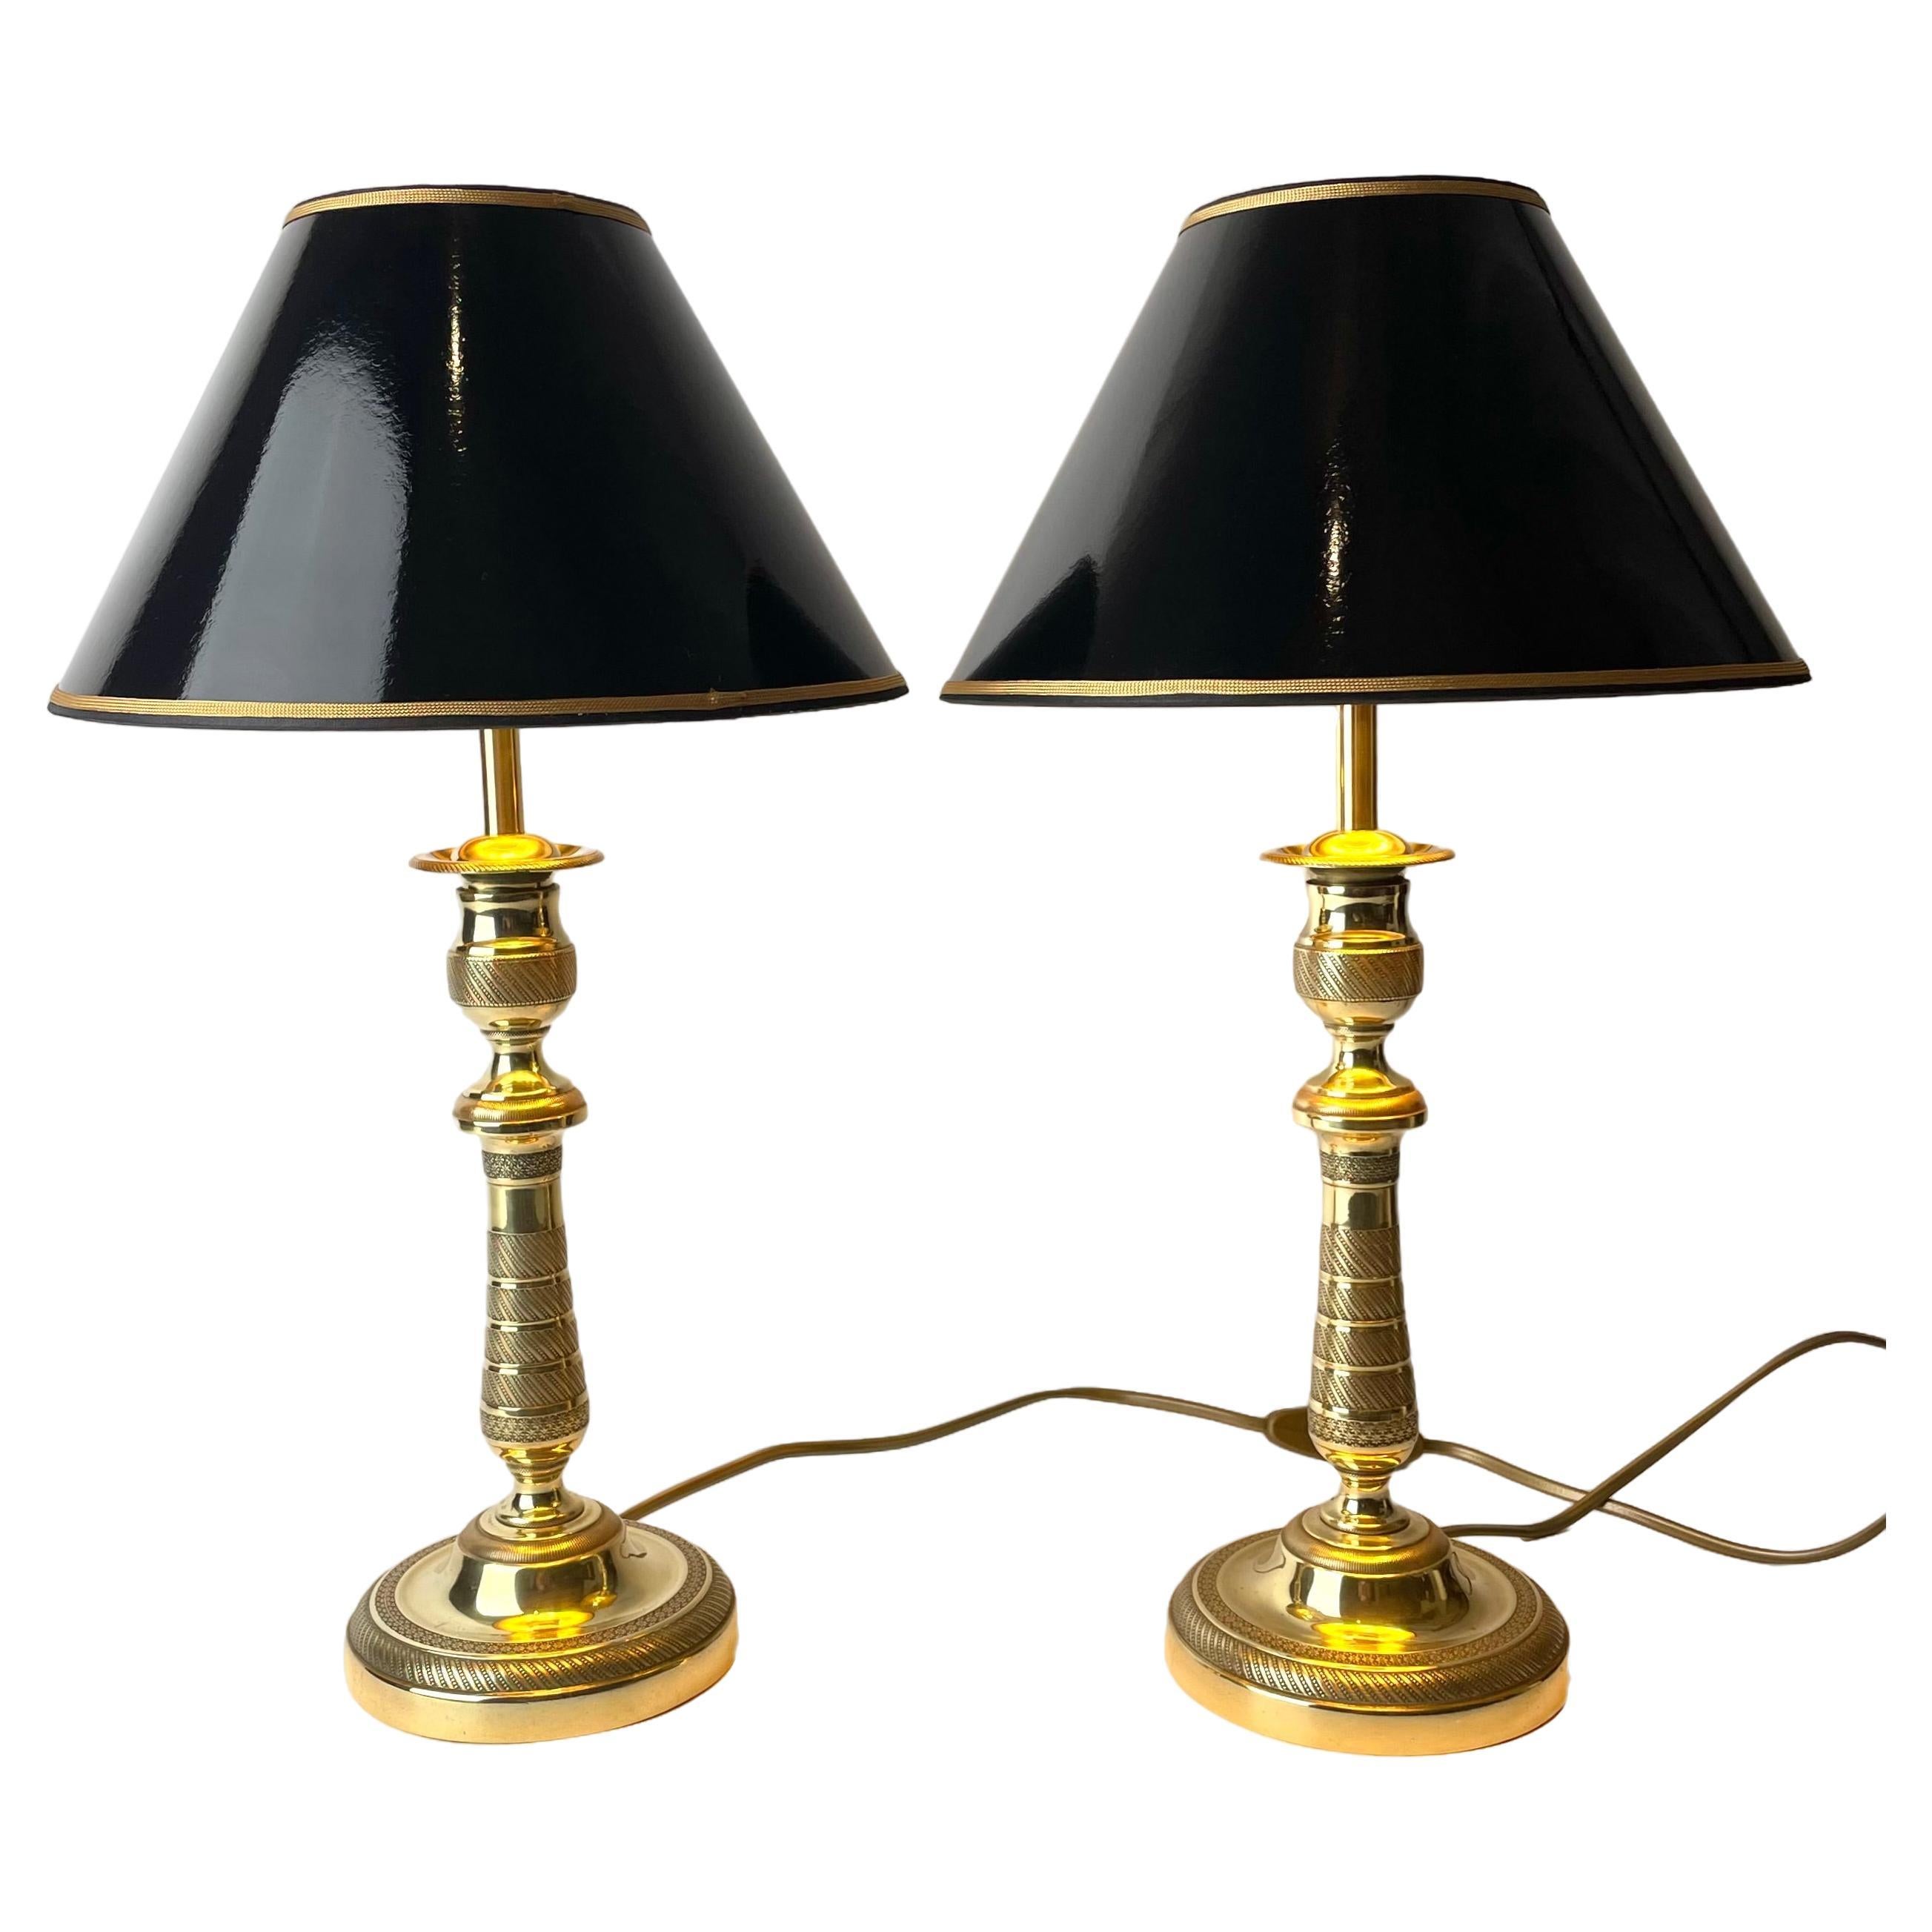 Elegant pair of Empire Table Lamps, originally candlesticks from the 1820s